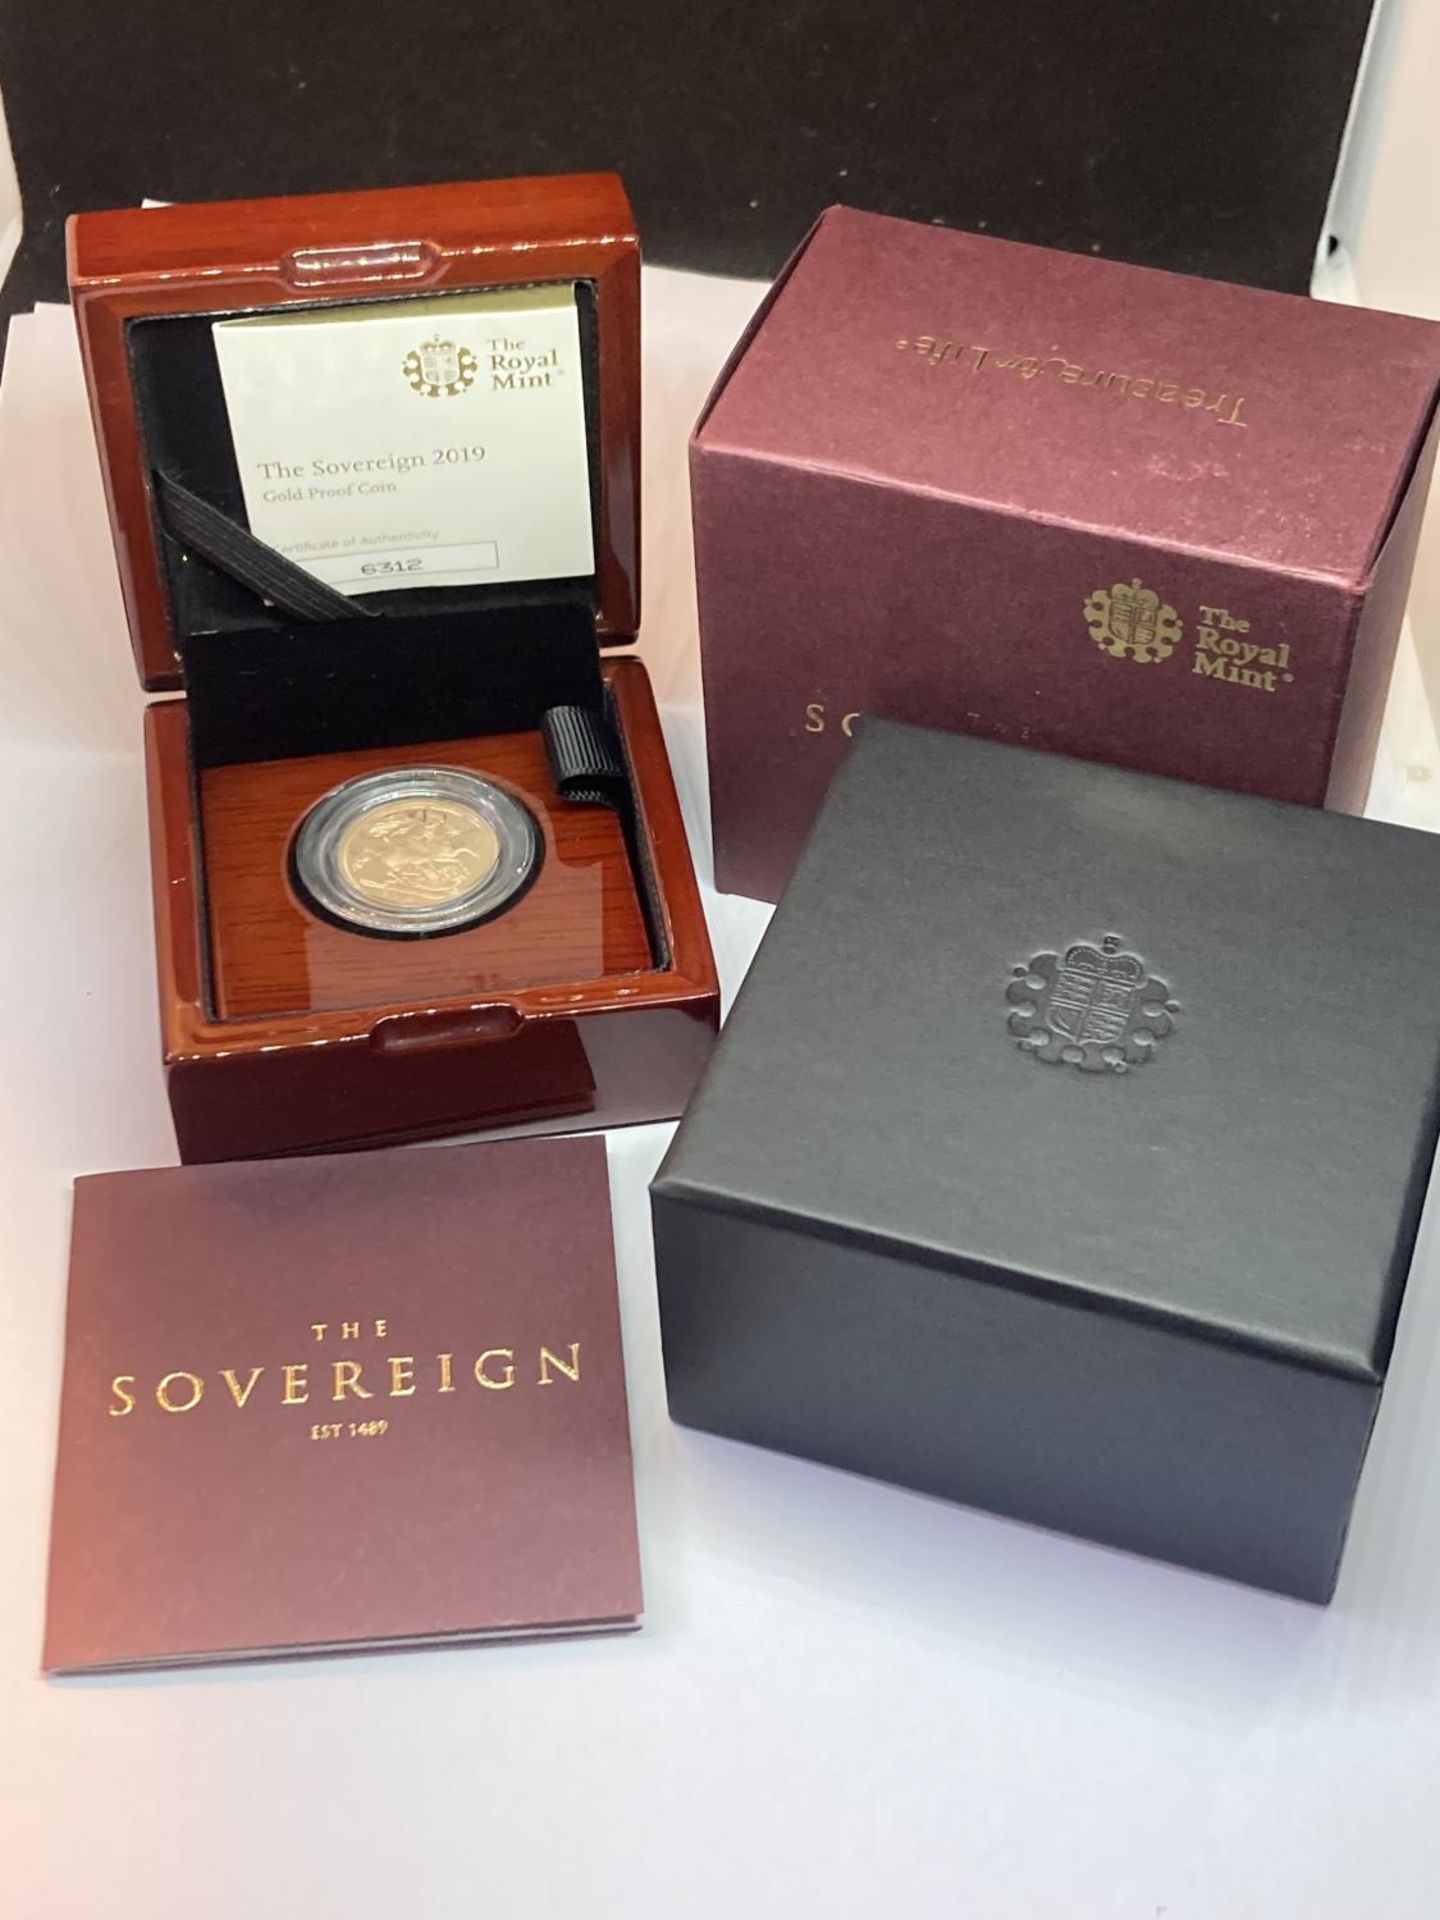 A 2019 THE SOVEREIGN GOLD PROOF LIMITED EDITION NUMBER 6,312 OF 9,500 IN A WOODEN BOXED CASE